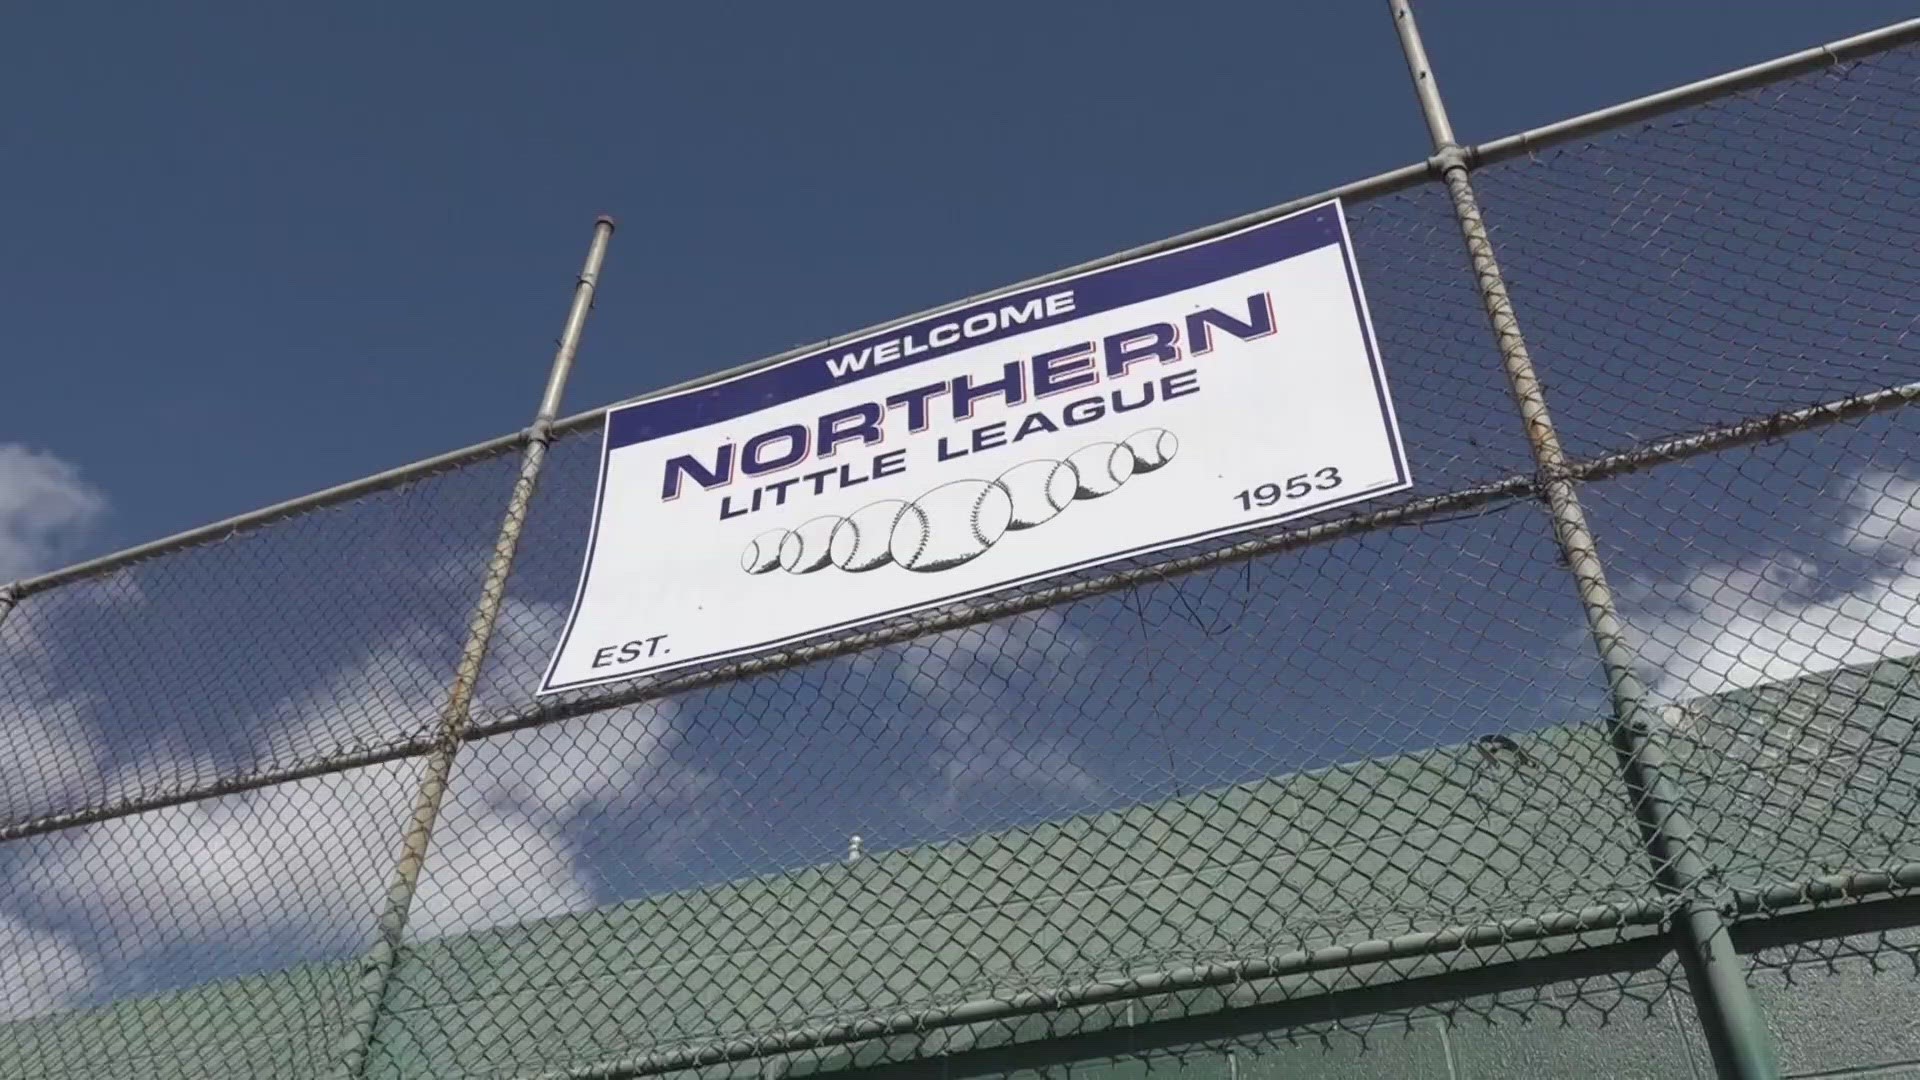 Vandalism and homelessness challenge Stockton Little Leagues